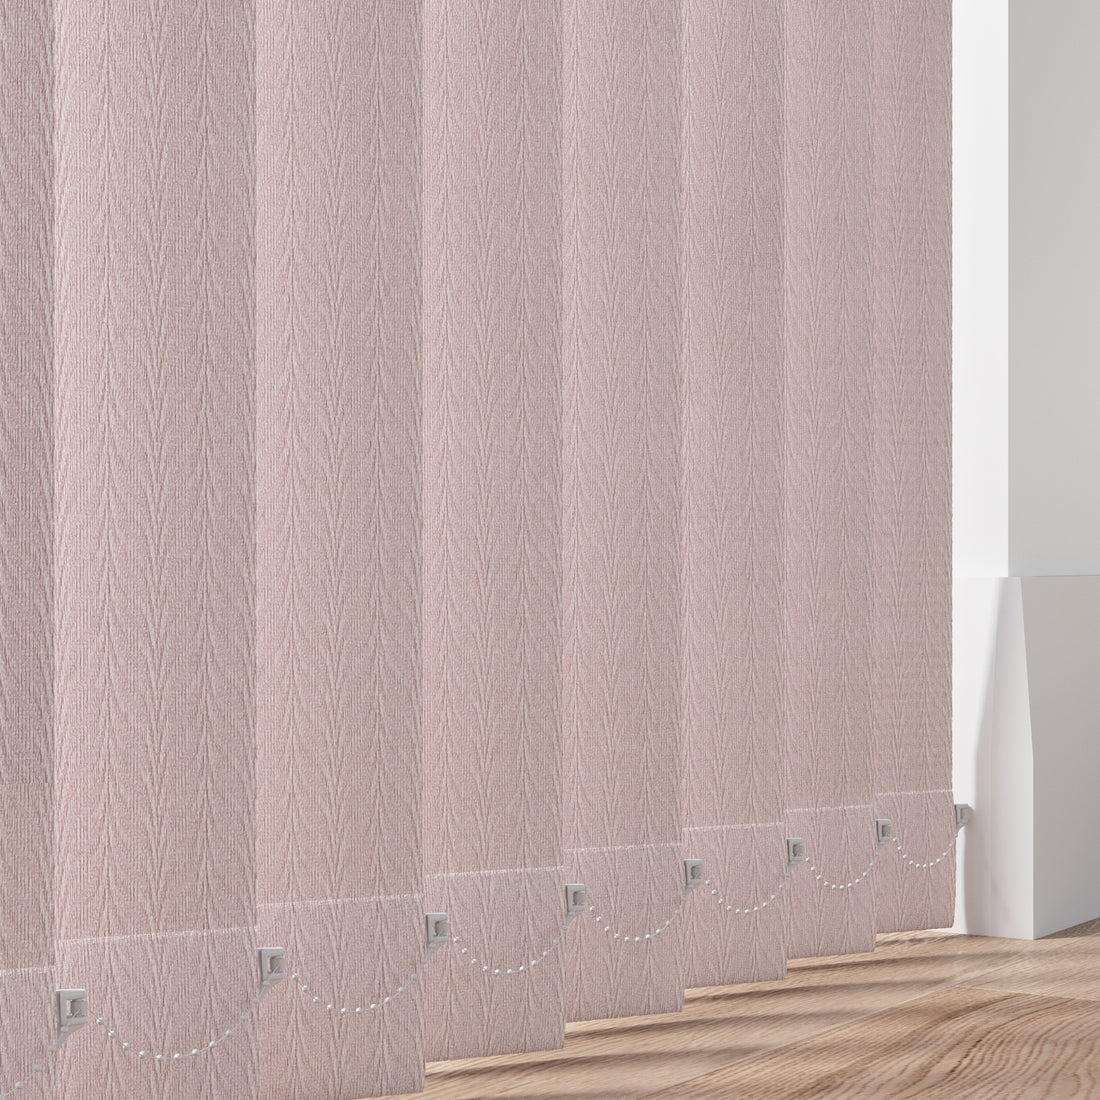 Feather Weave Chantilly - Pink Replacement Slats